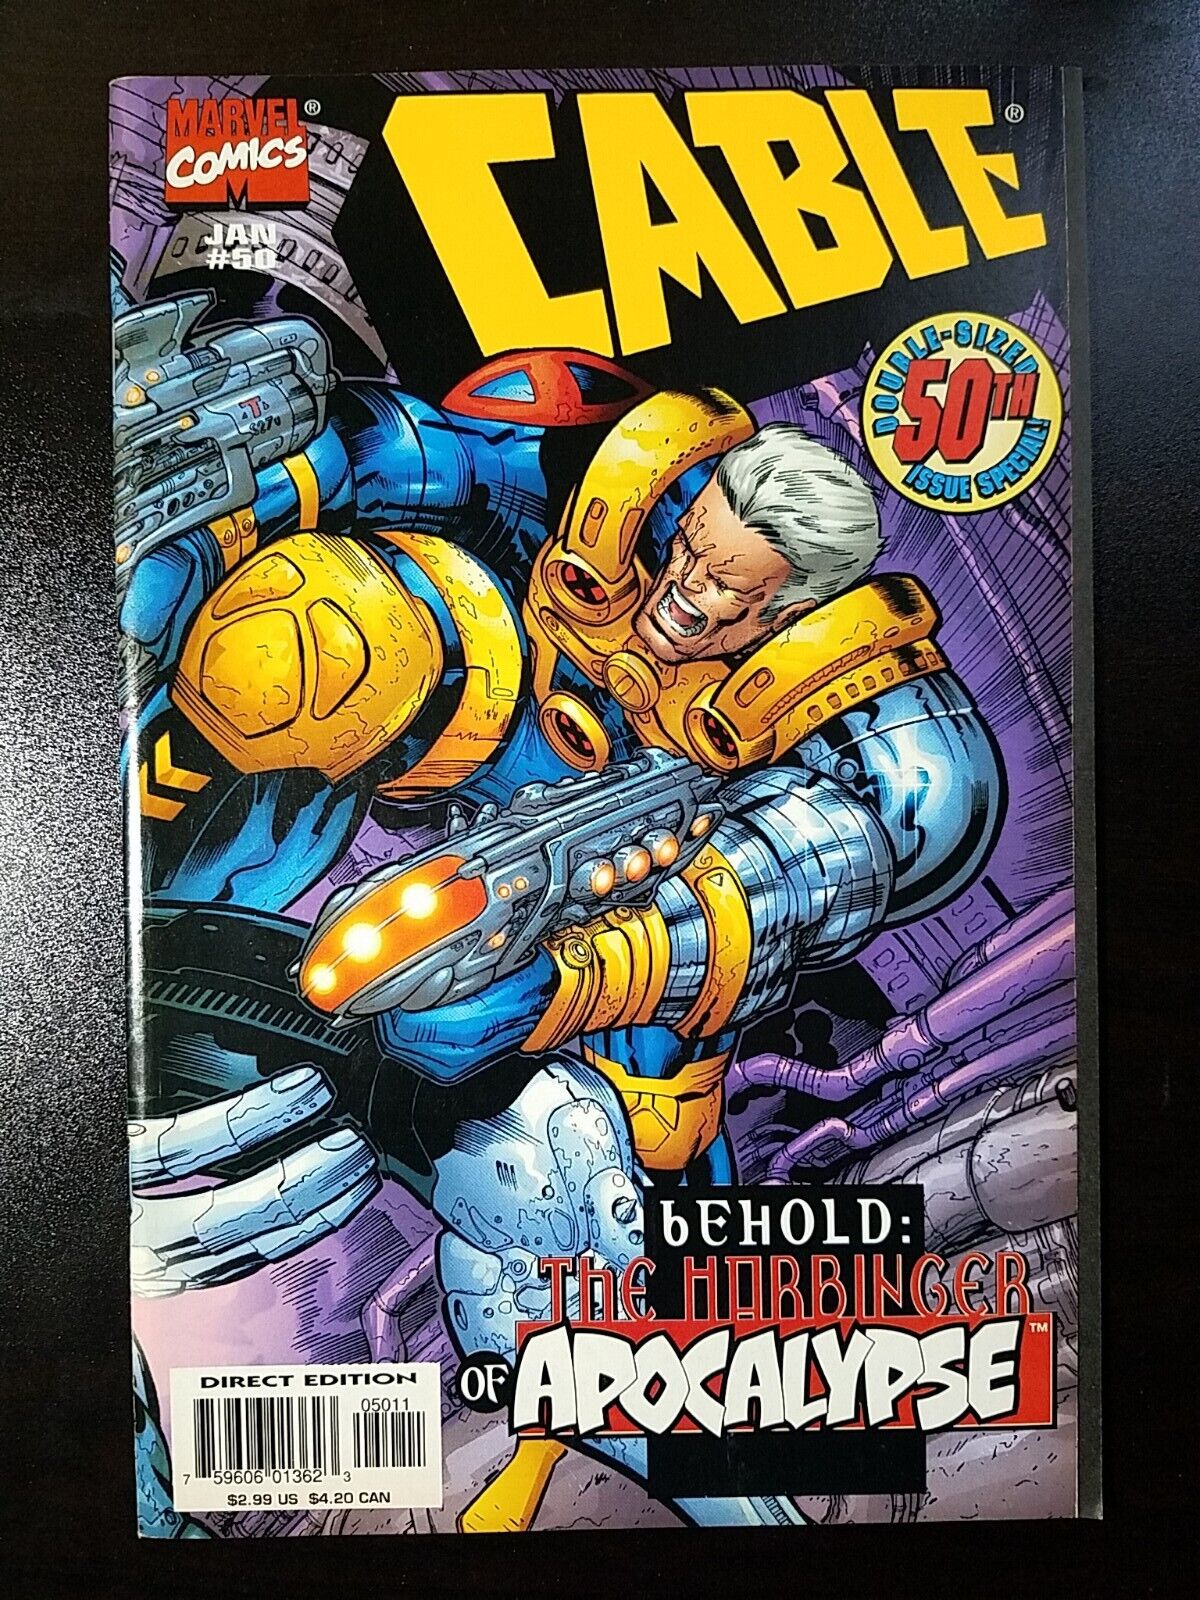 Cable #50 (Marvel, January 1998)